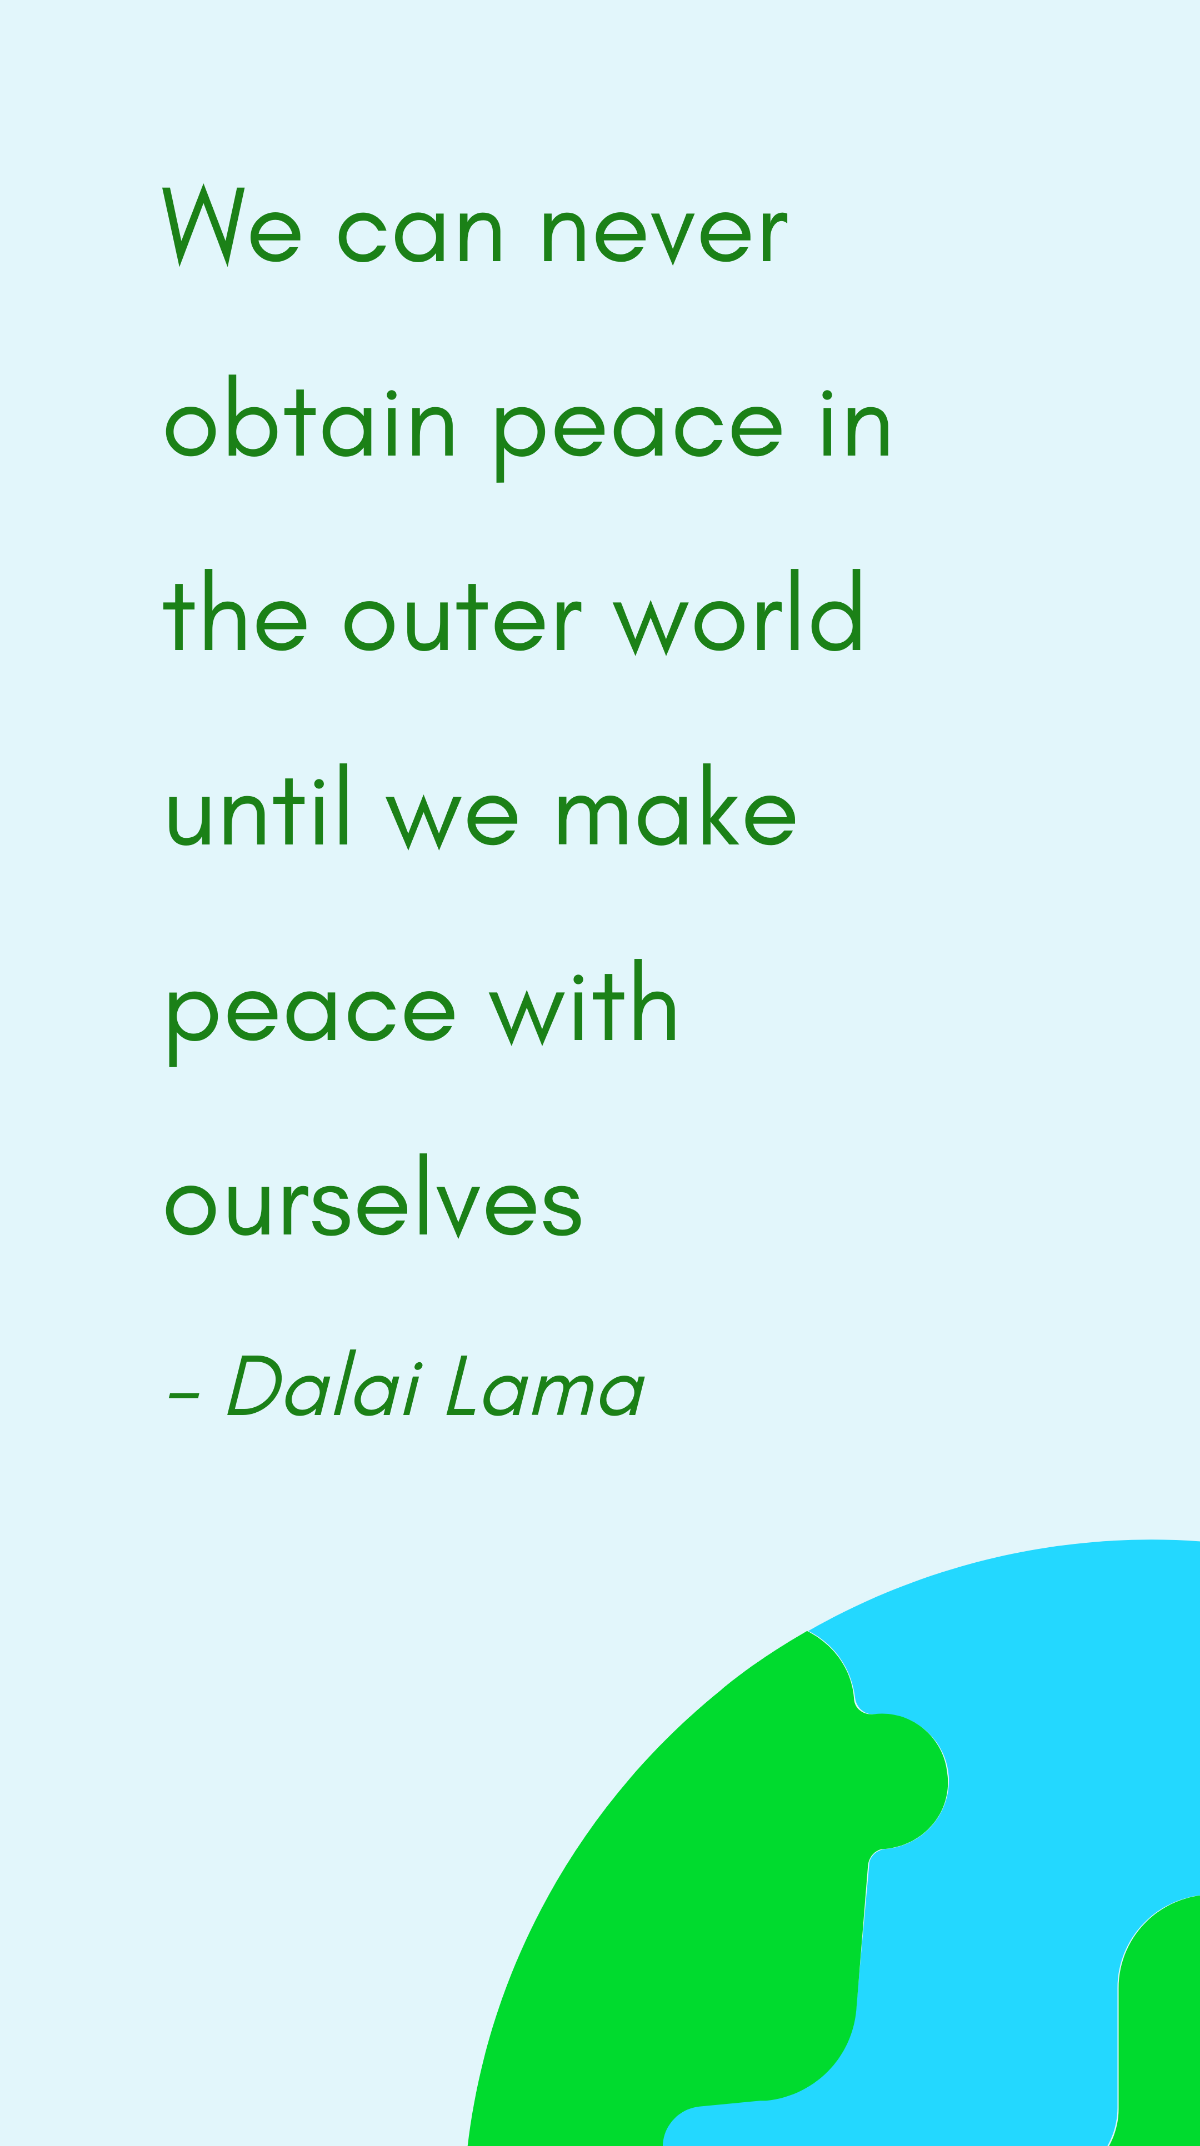 Dalai Lama - We can never obtain peace in the outer world until we make peace with ourselves Template